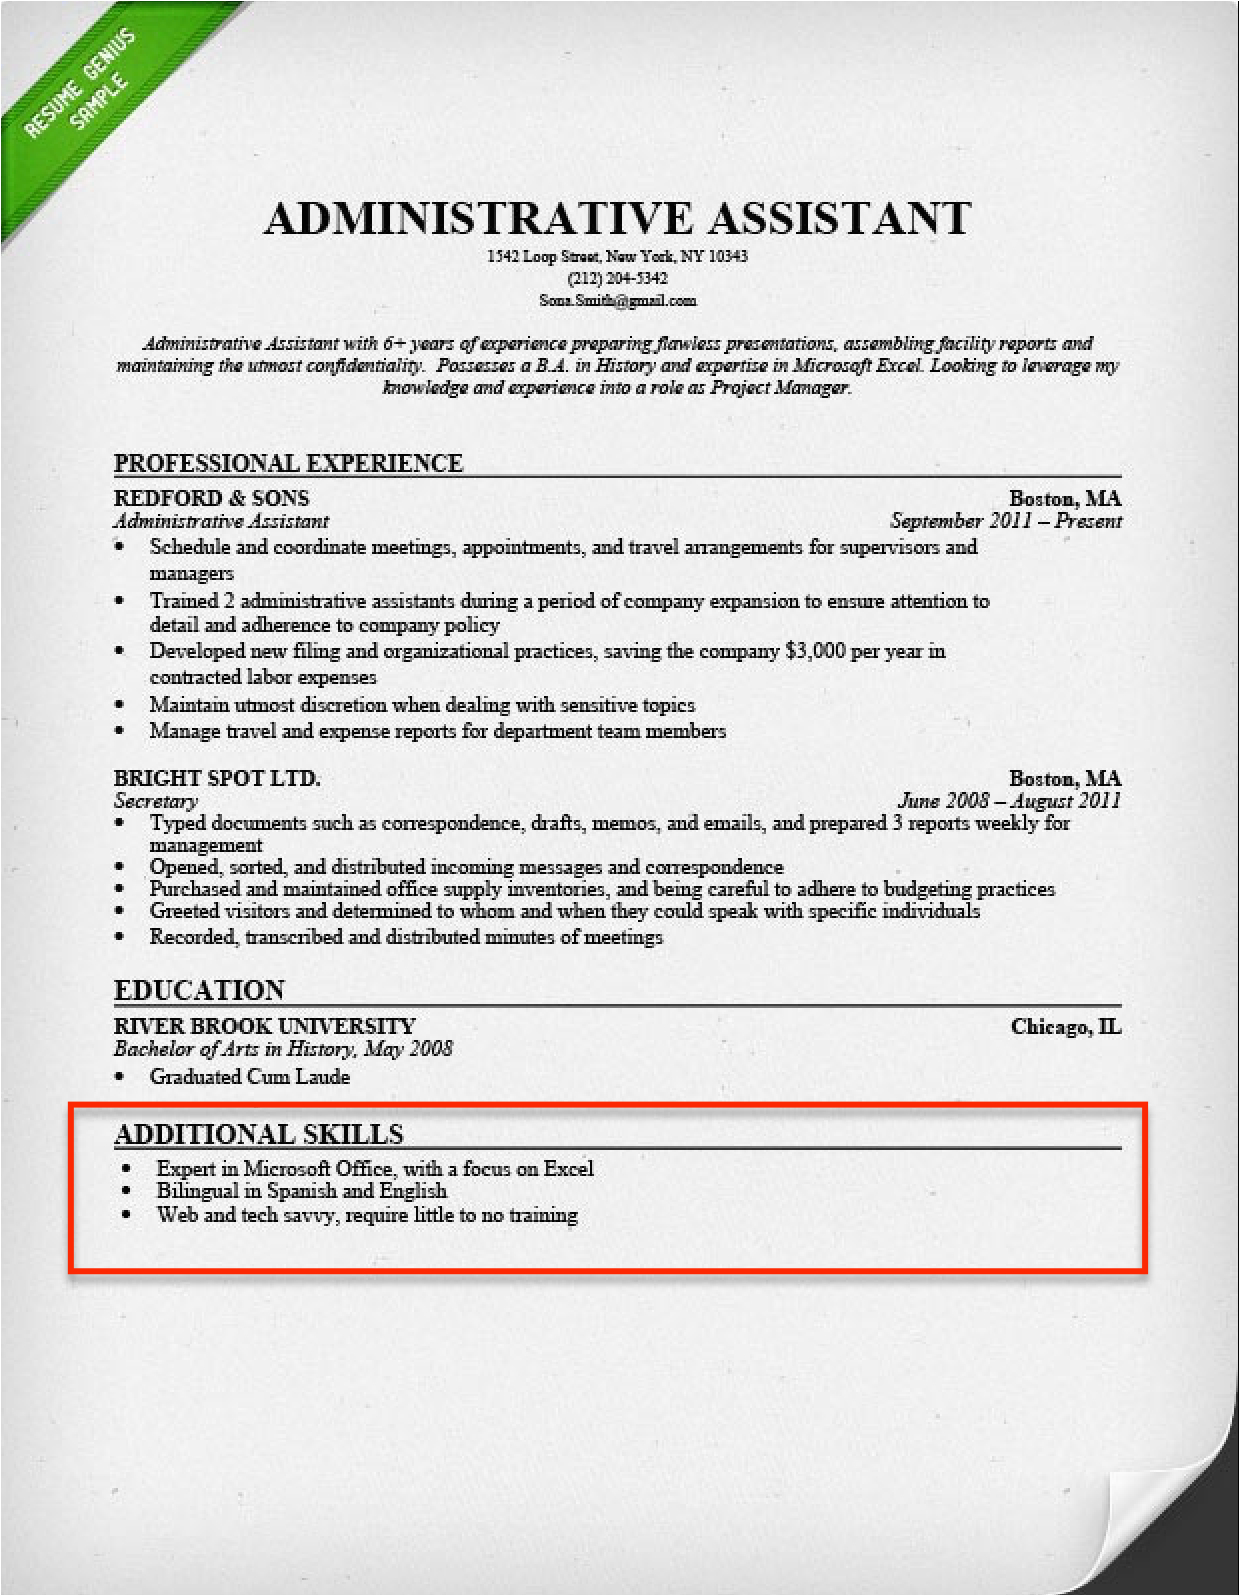 List Of Computer Skills Resume Sample Sample Resume with Puter Skills Section How to Write